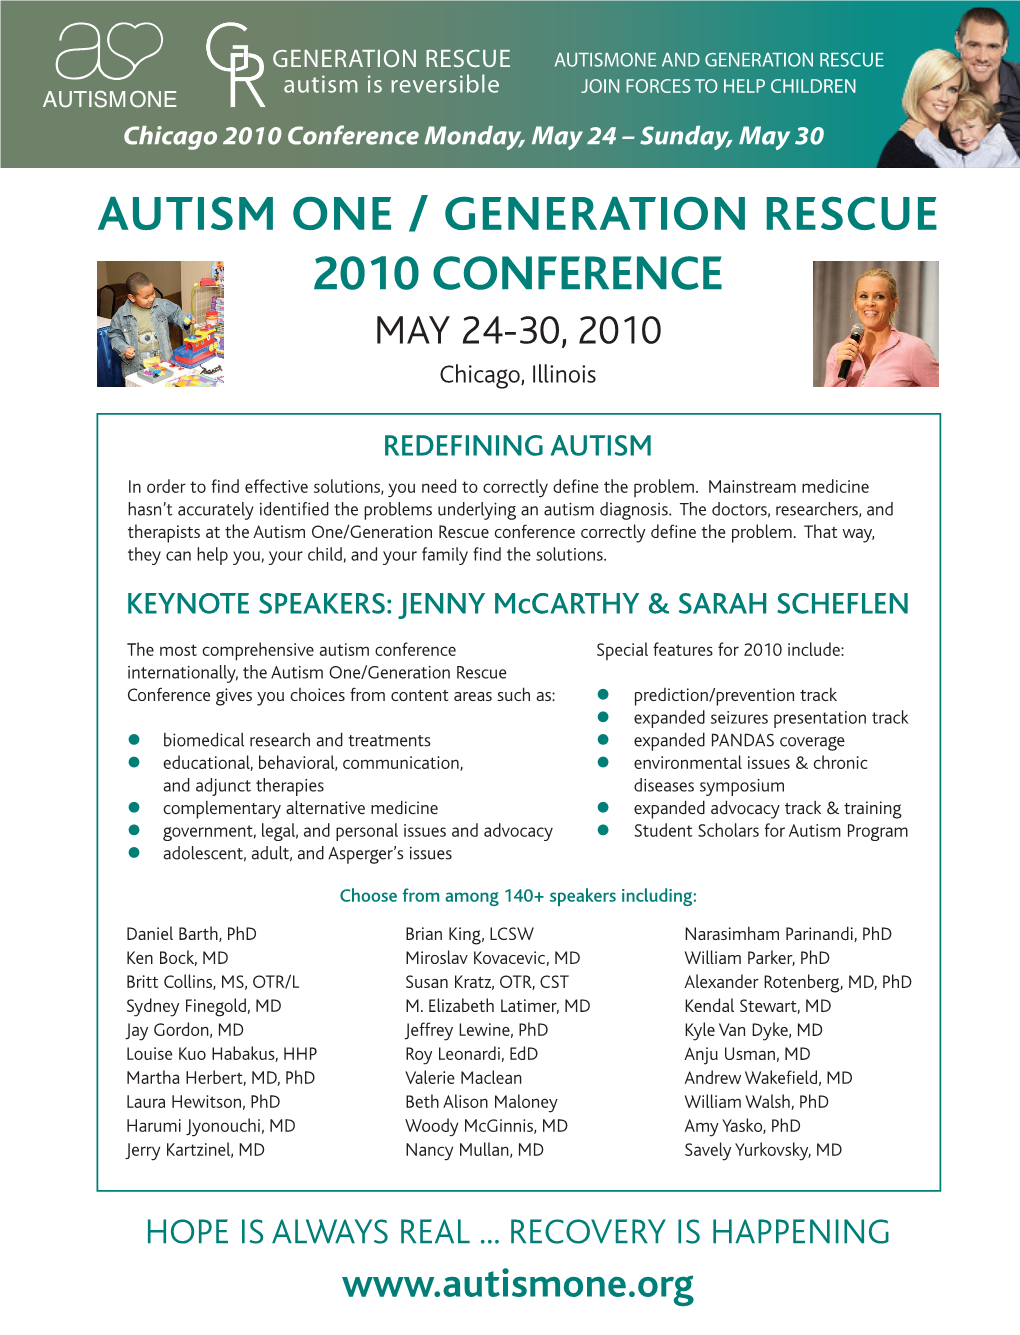 AUTISM ONE / GENERATION RESCUE 2010 CONFERENCE MAY 24-30, 2010 Chicago, Illinois